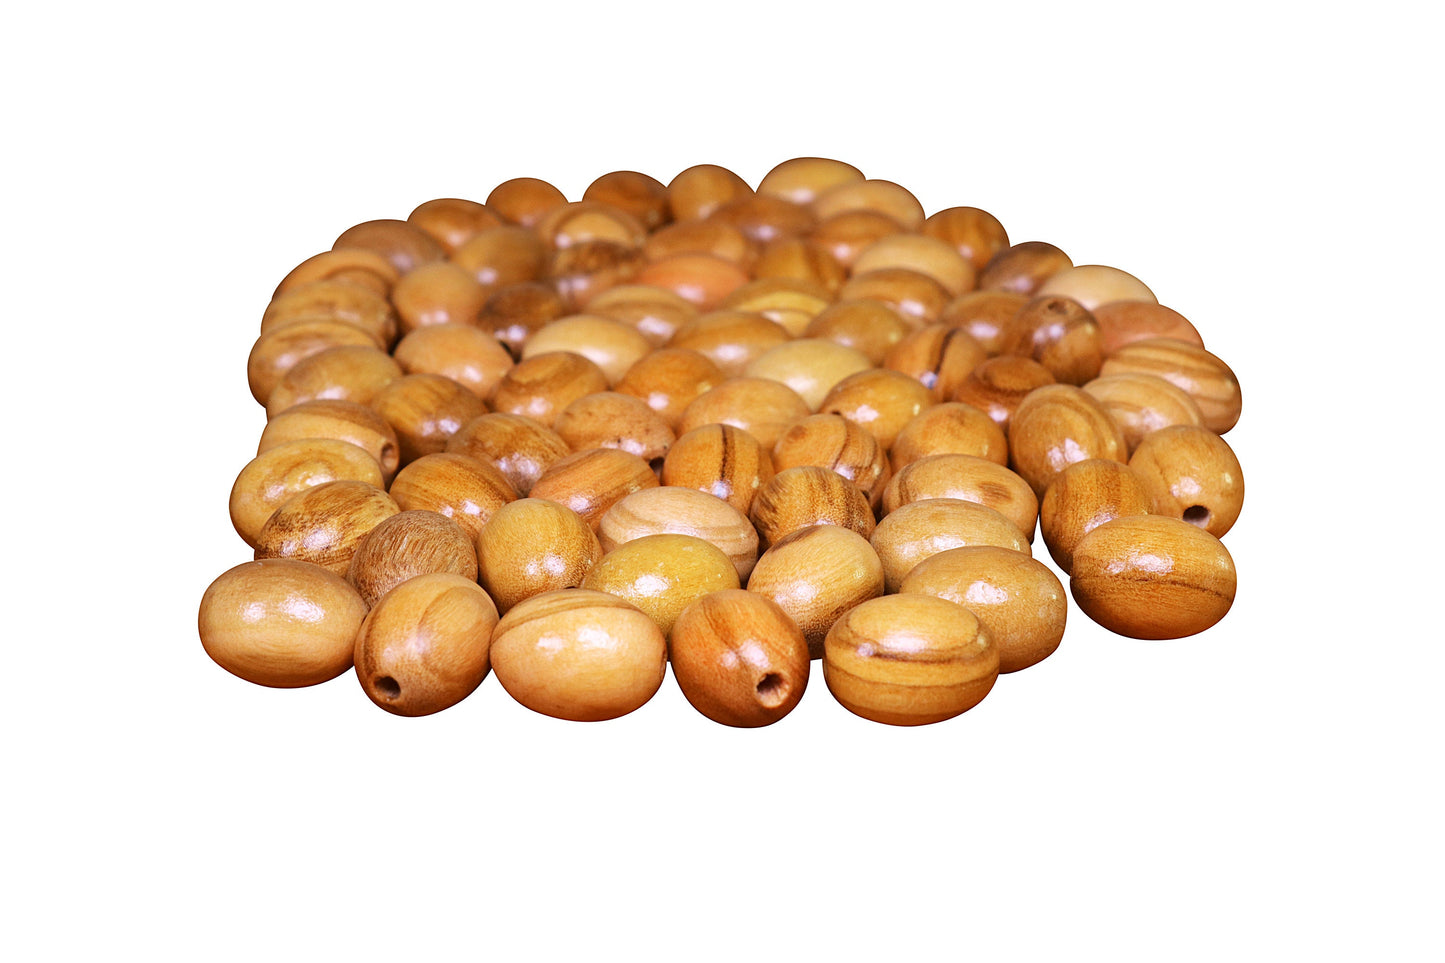 NazarethFairTrade Olive Wood Beads Handcrafted In The Holy Land - Top Quality Natural Oval Wooden Beads for Crafting and Jewelry Making